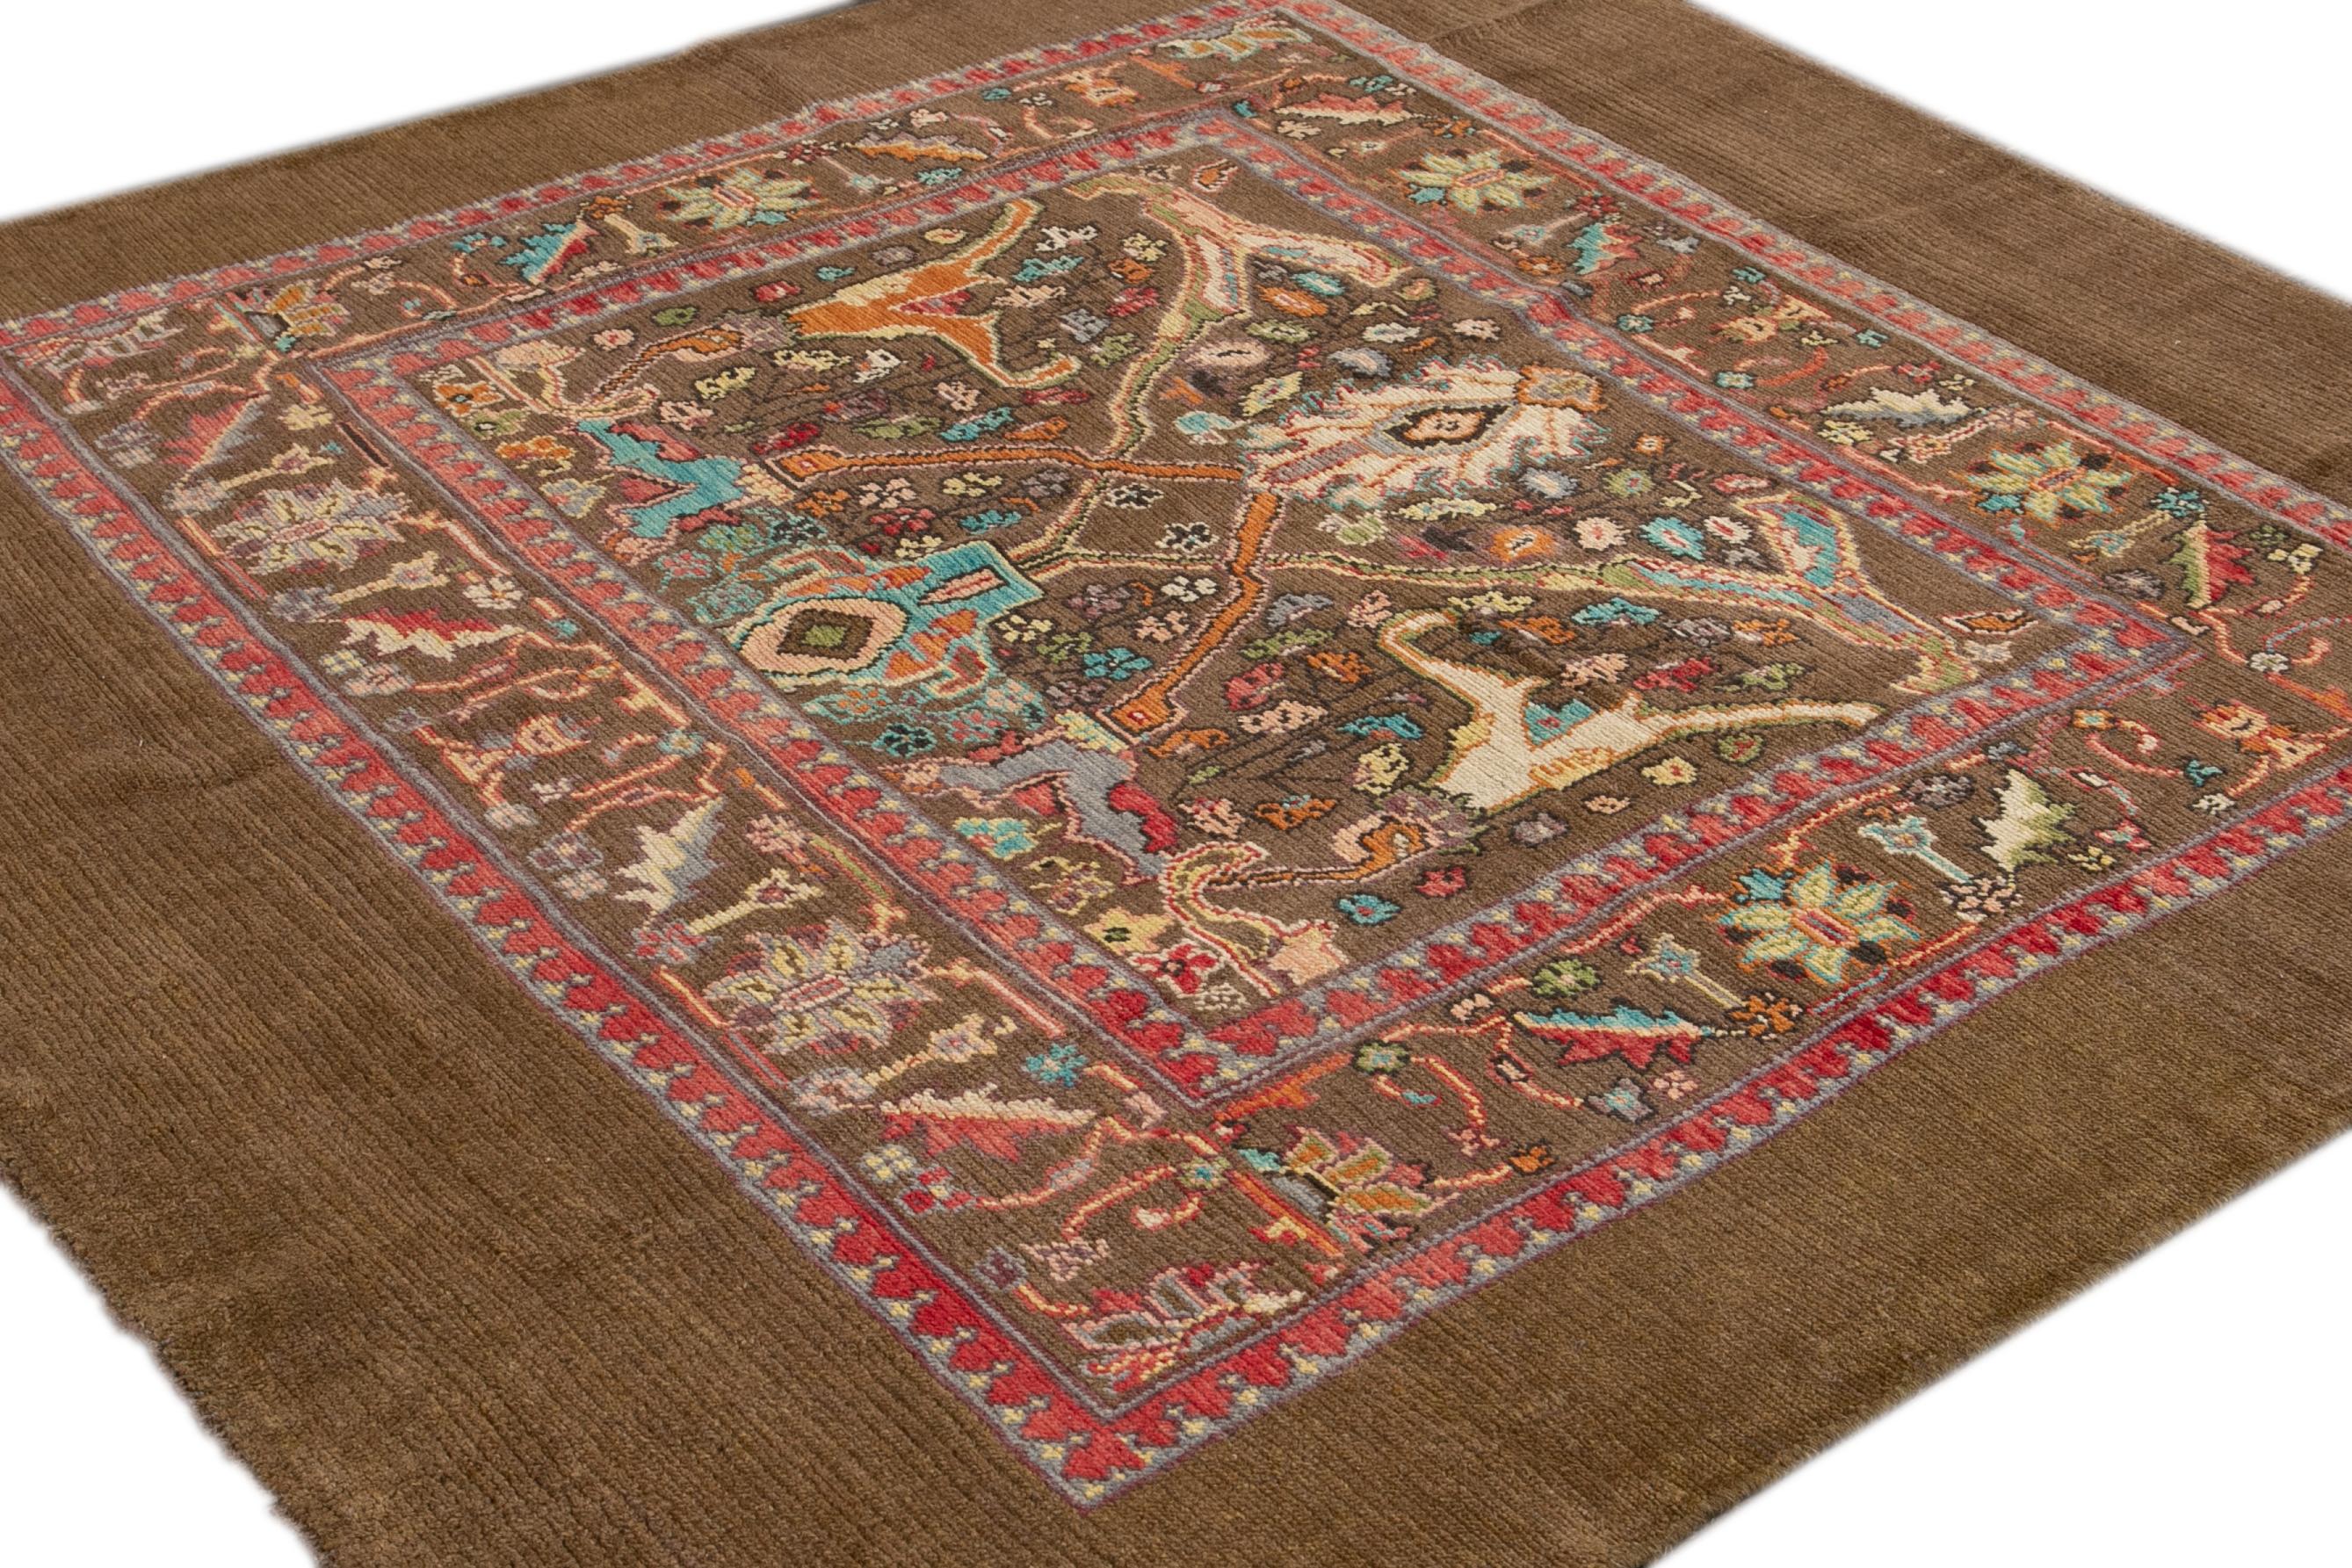 Apadana's Brown Modern Revival Square Handmade Wool Rug In New Condition For Sale In Norwalk, CT